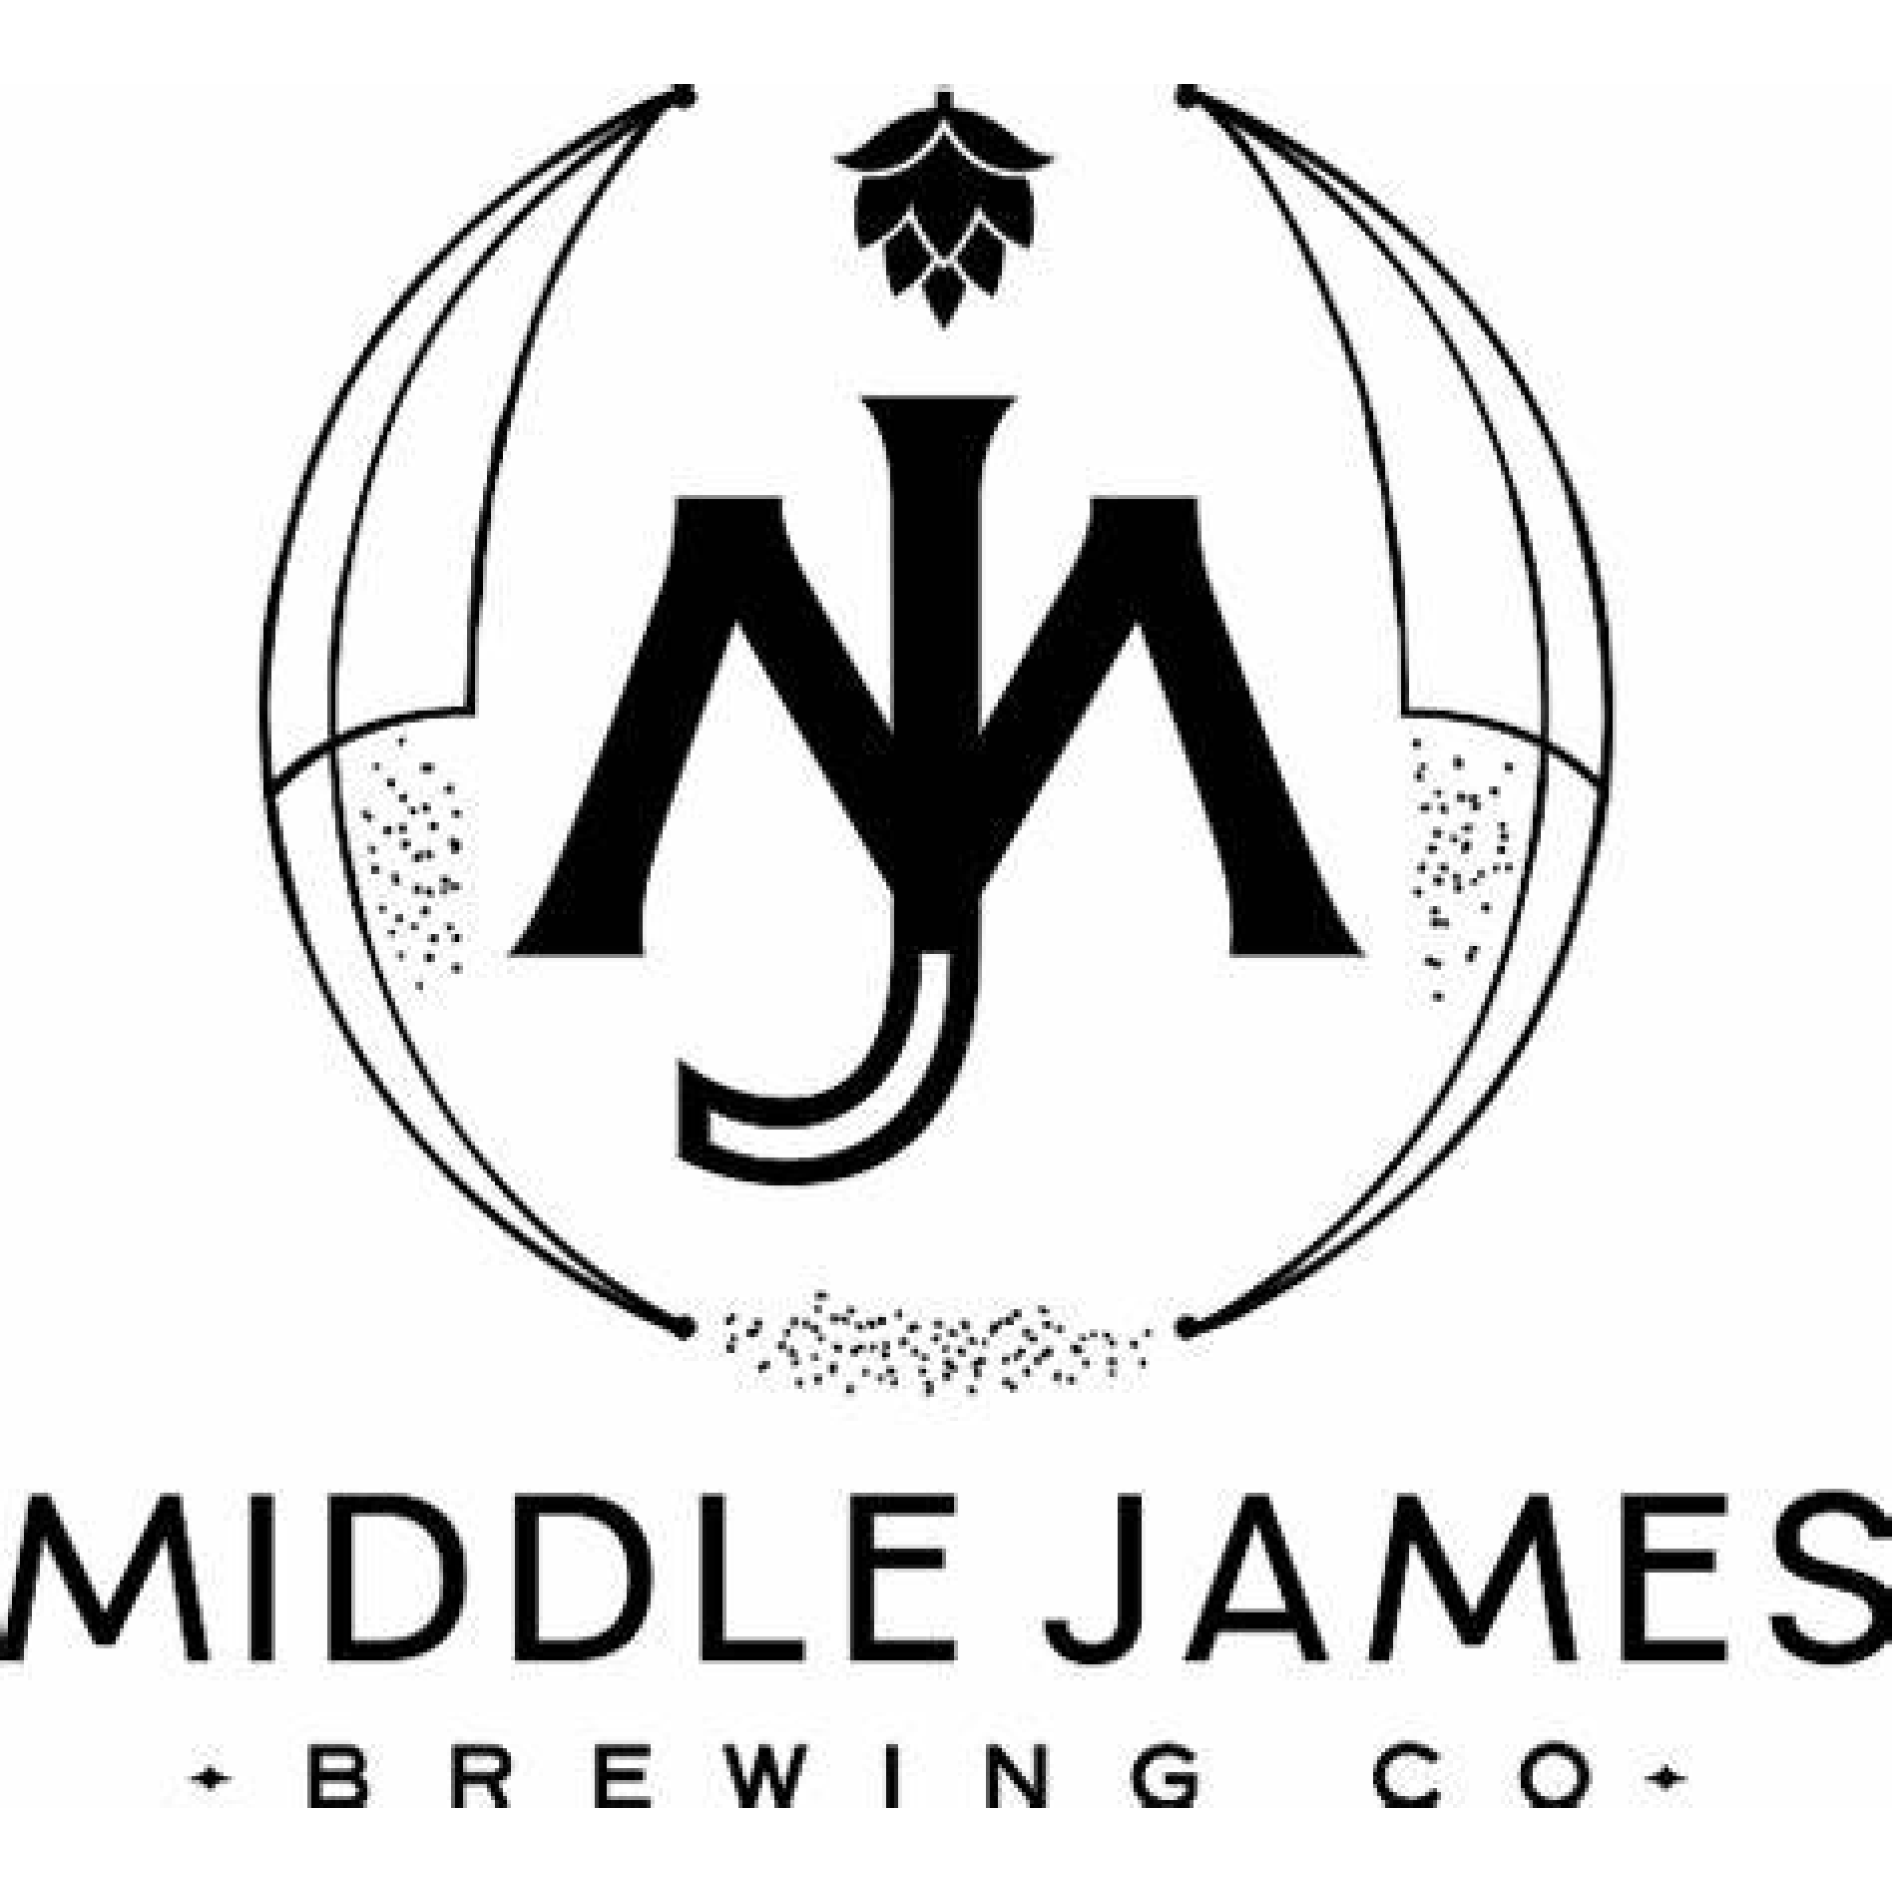 Middle James Brewing